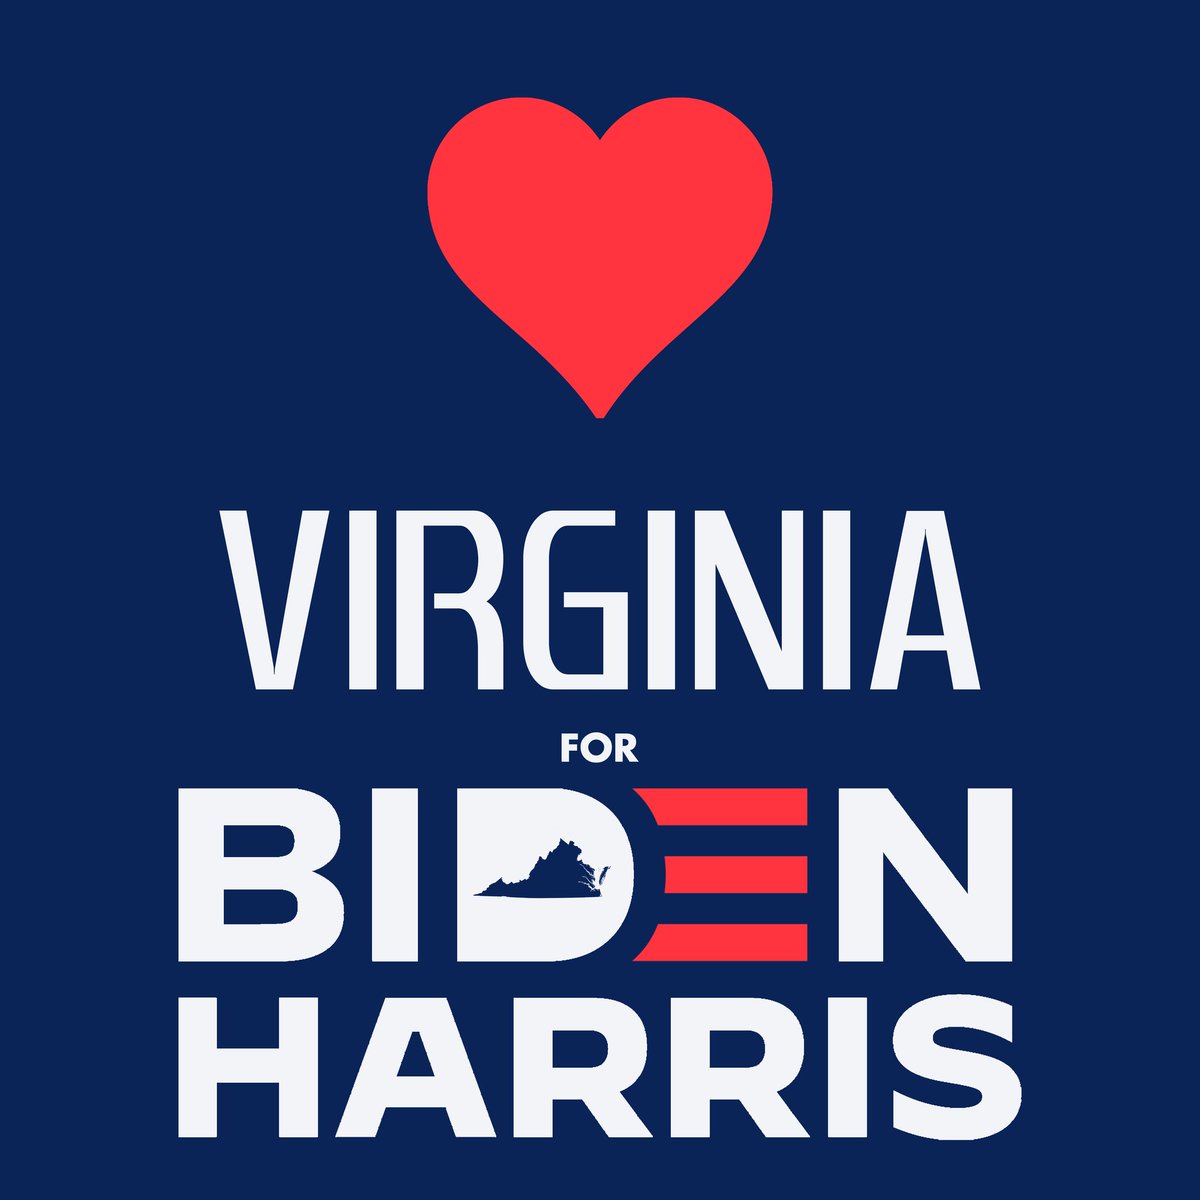 ICYMI my husband  @viva_verde is incredibly talented and made these beautiful state coalition graphics for  #BidenHarris supporters. More otw and he takes requests for priority! RT your state if you're  #RidinWithBidenHarris 8/8  #Vermont  #Virginia  #Washington  #Wisconsin